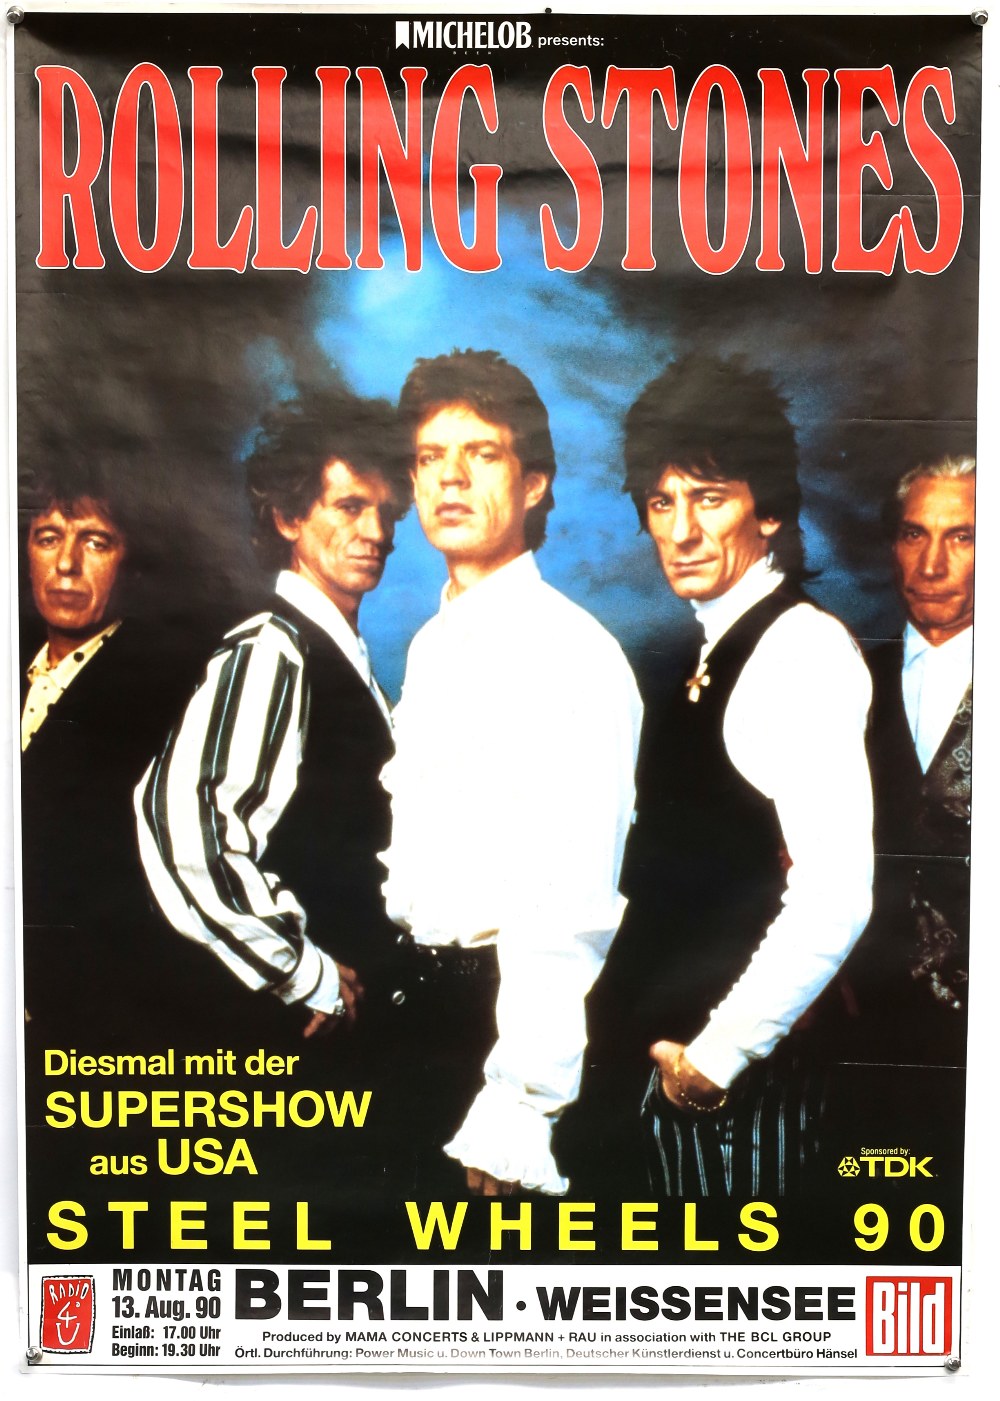 Approx. 50 Music tour and promotional posters including The Rolling Stones Steel Wheels 90, Toto, - Image 2 of 4